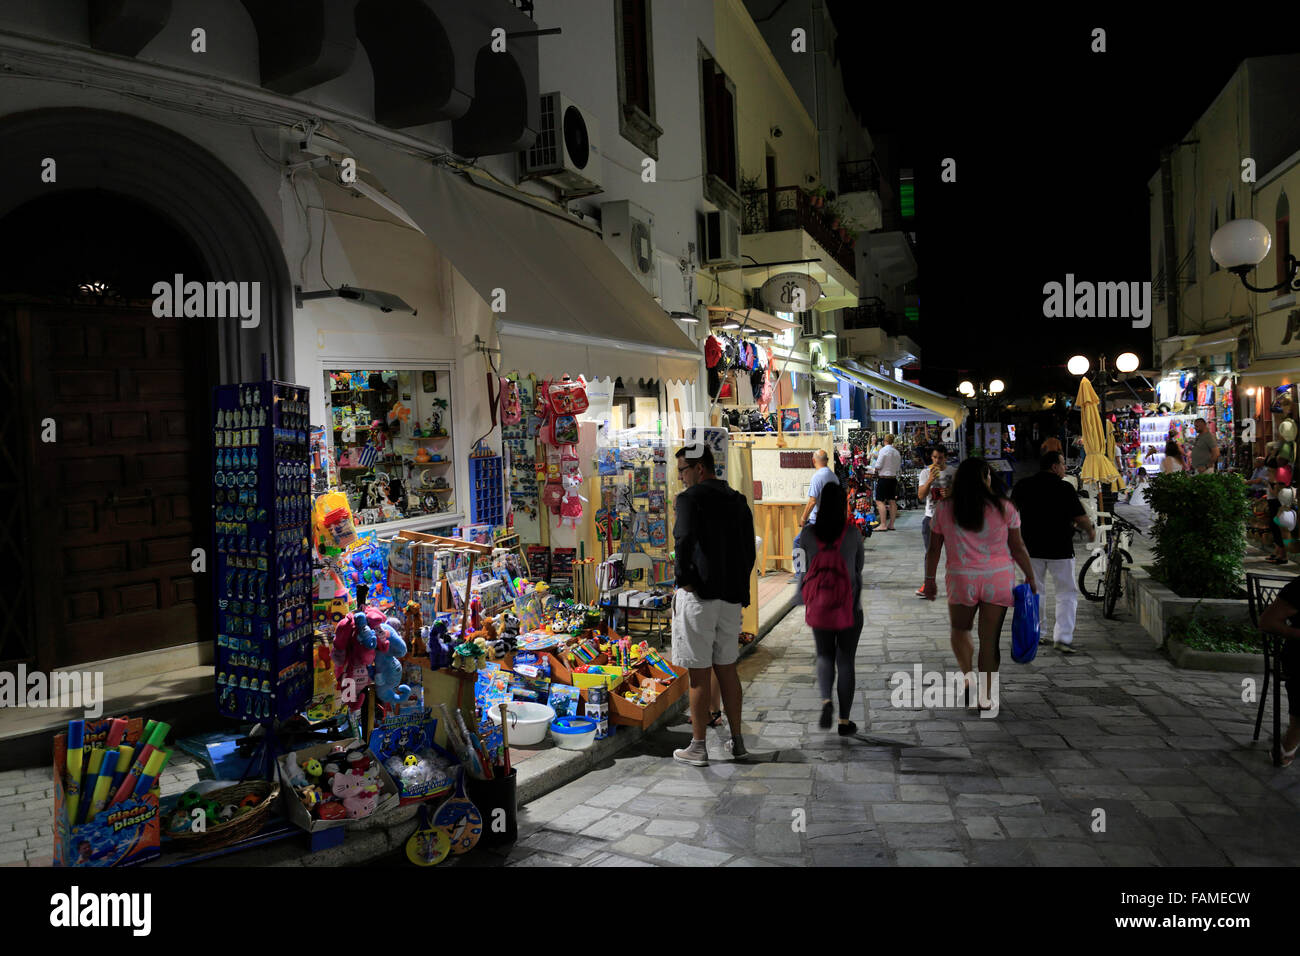 People shopping at night, Kos town, Kos Island, Dodecanese group of islands, South Aegean Sea, Greece. Stock Photo